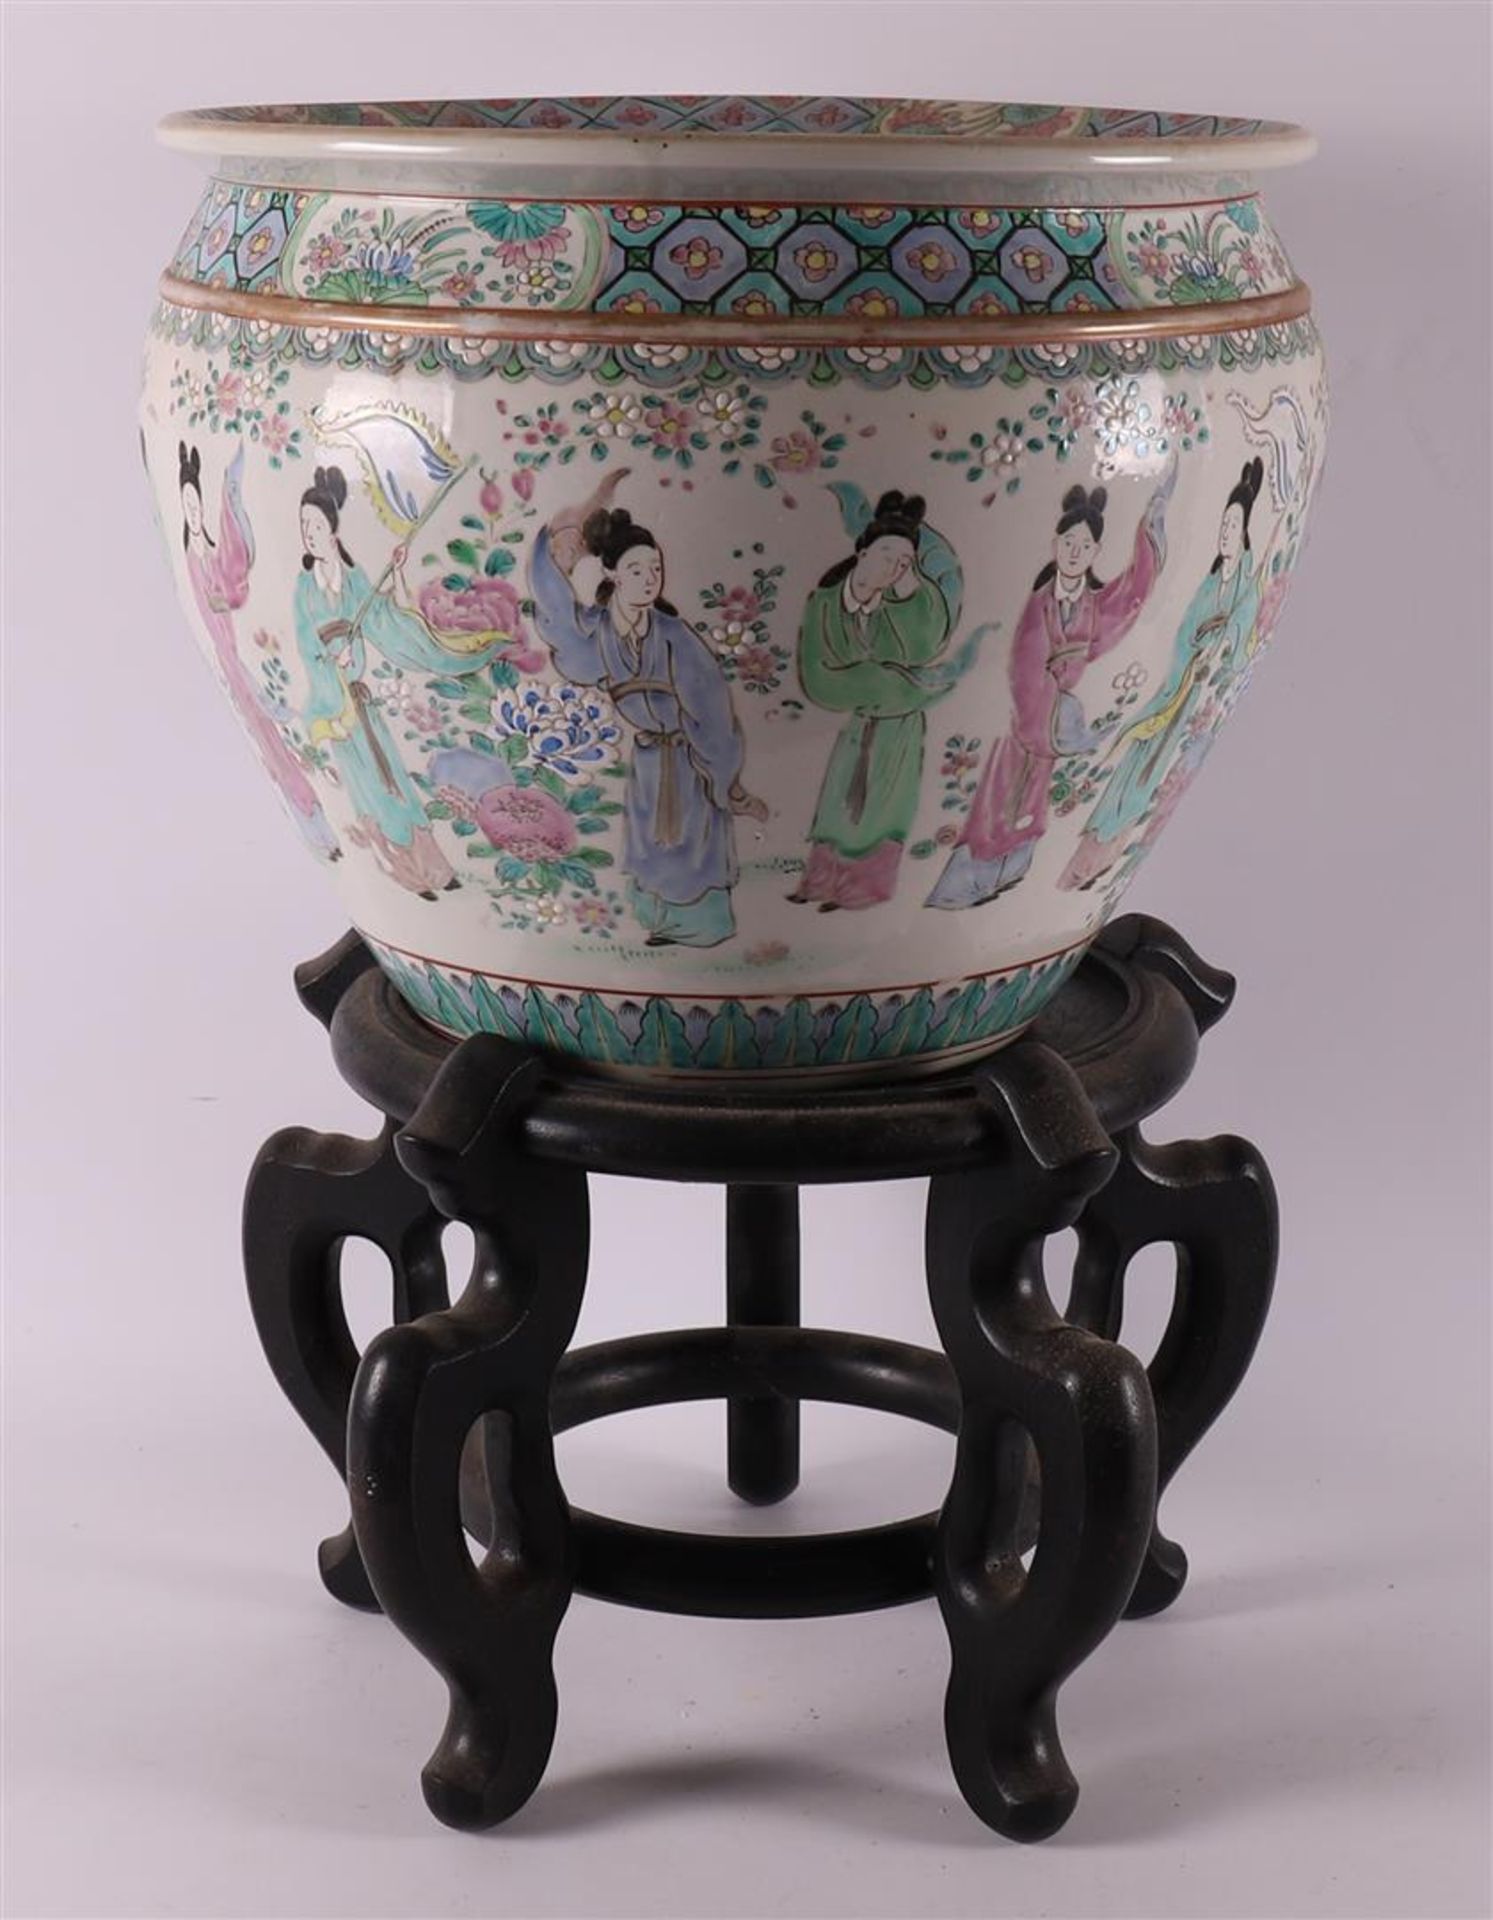 A porcelain cachepot or fishbowl on a loose wooden base, China, 20th century. - Image 4 of 7